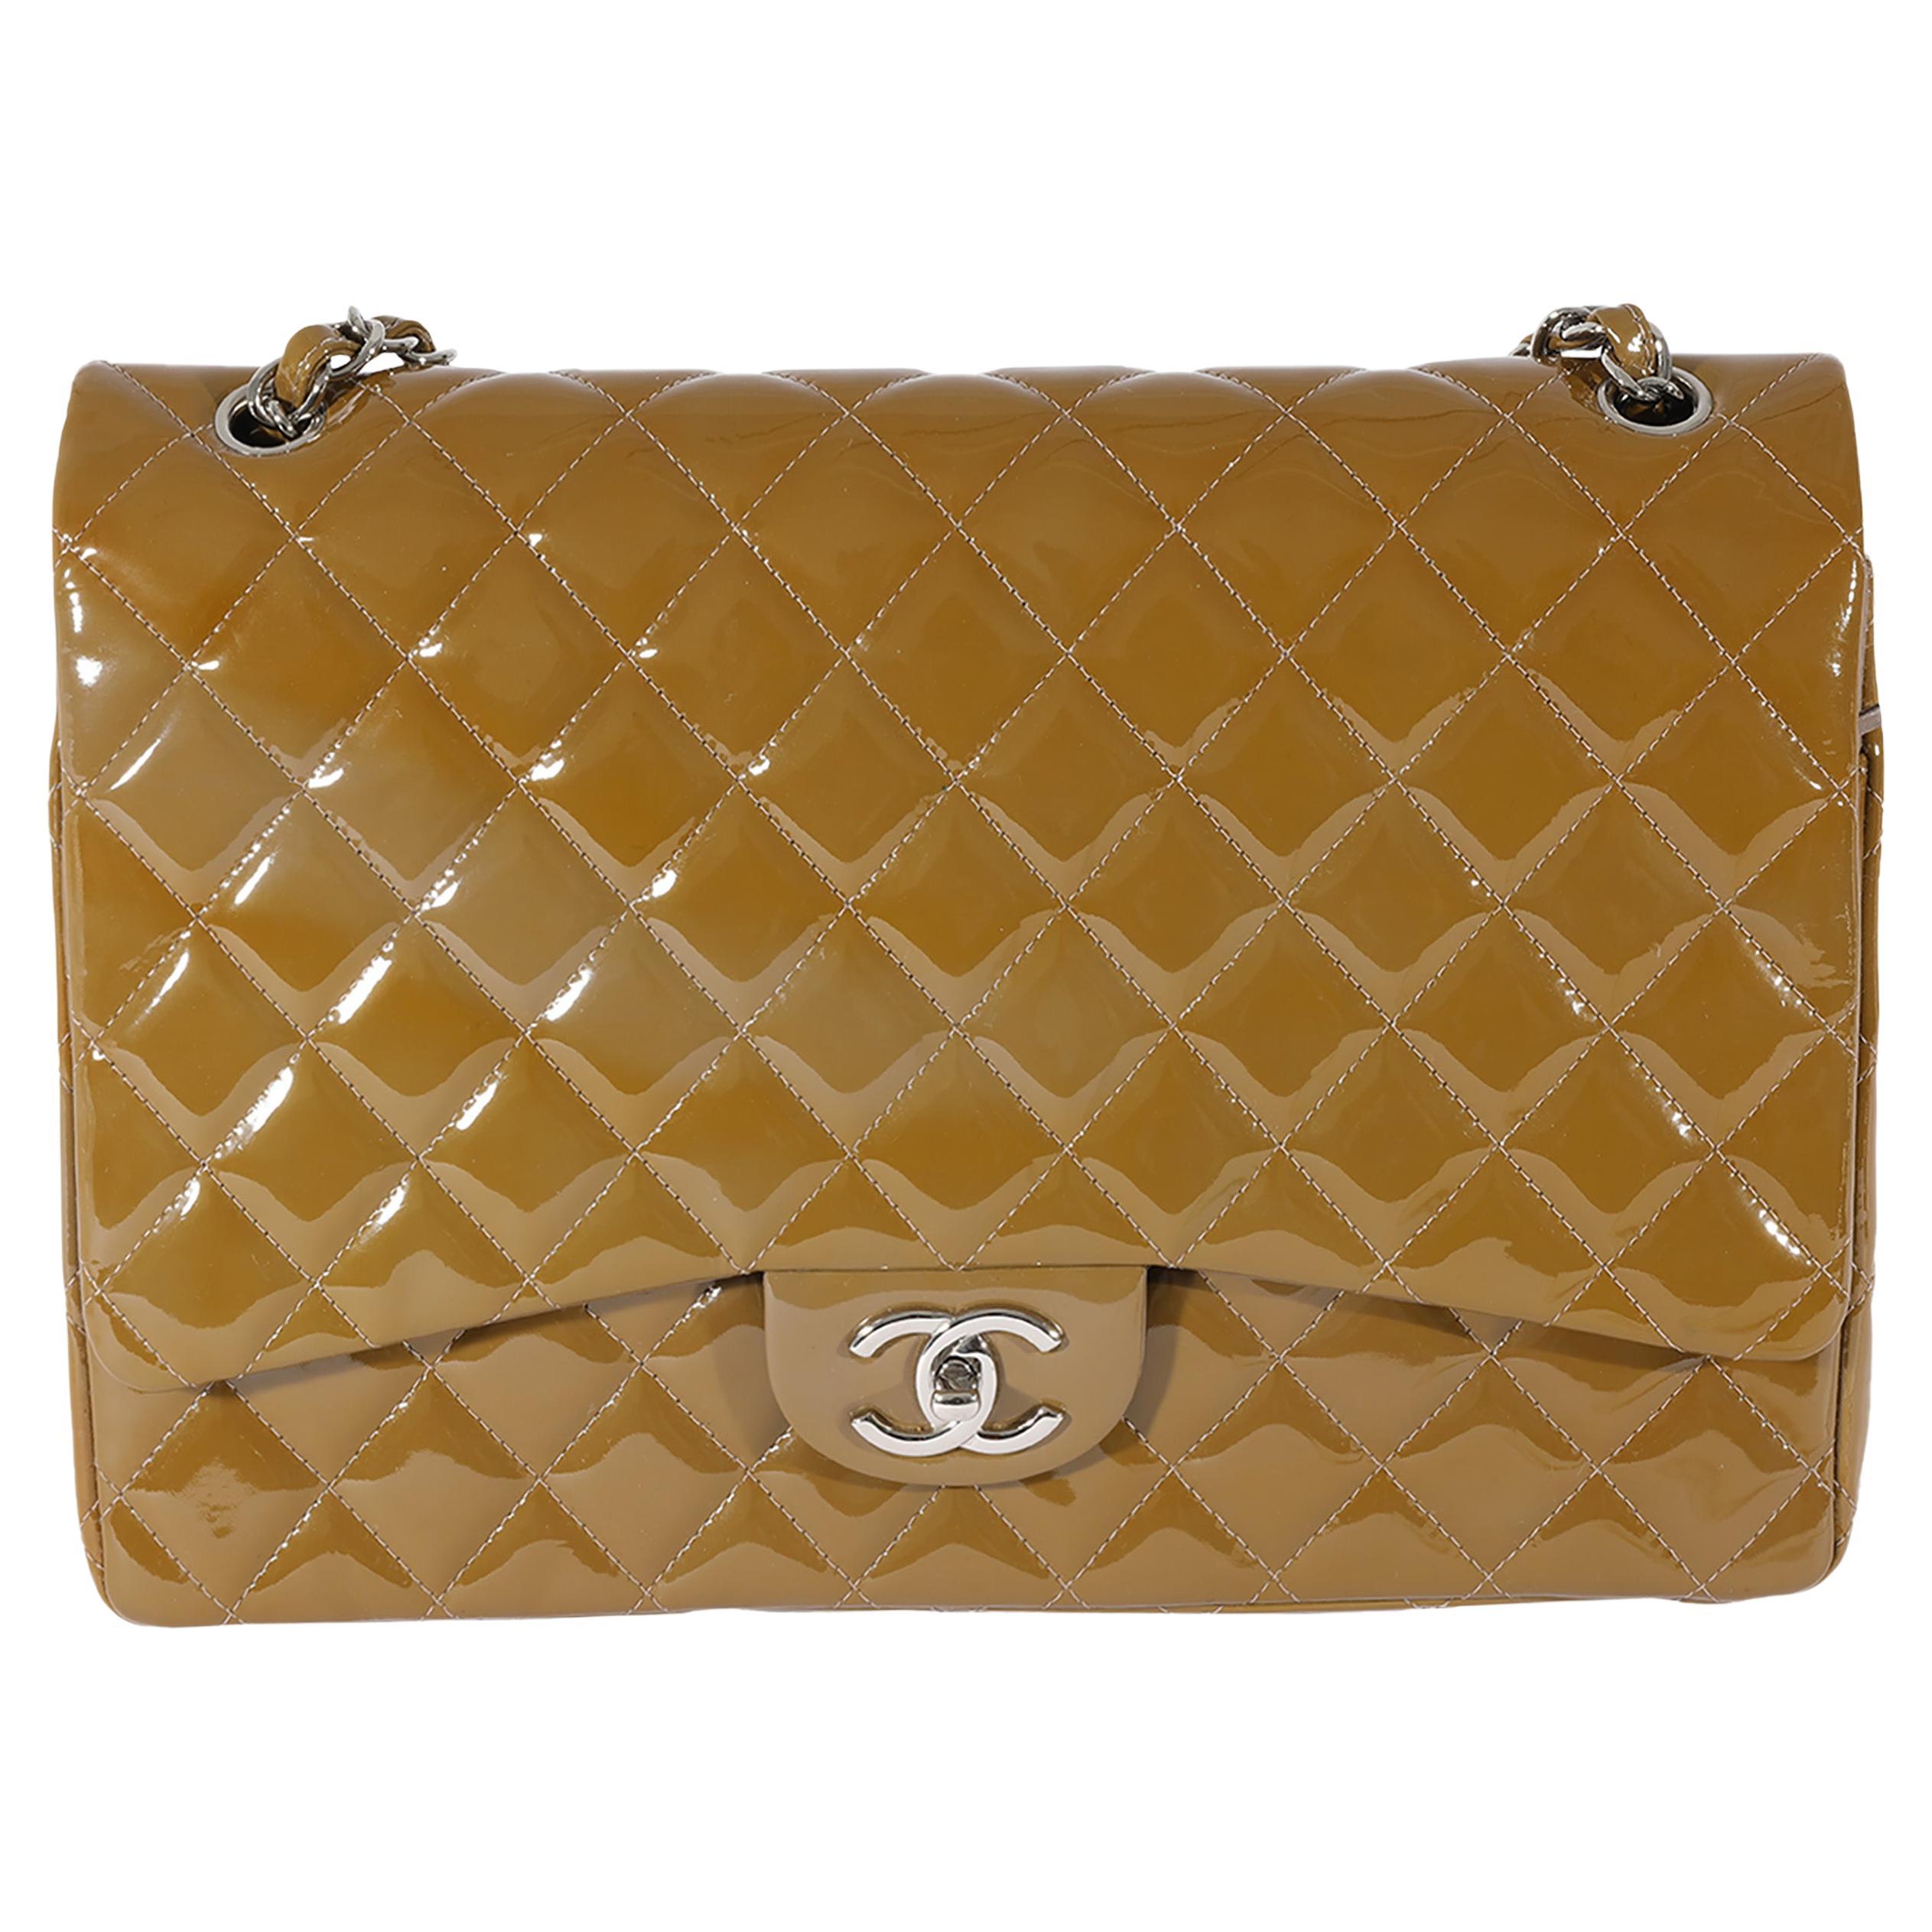 CHANEL Patent Quilted Small Accordion Reissue 2.55 Flap - Olive Green  Crossbody